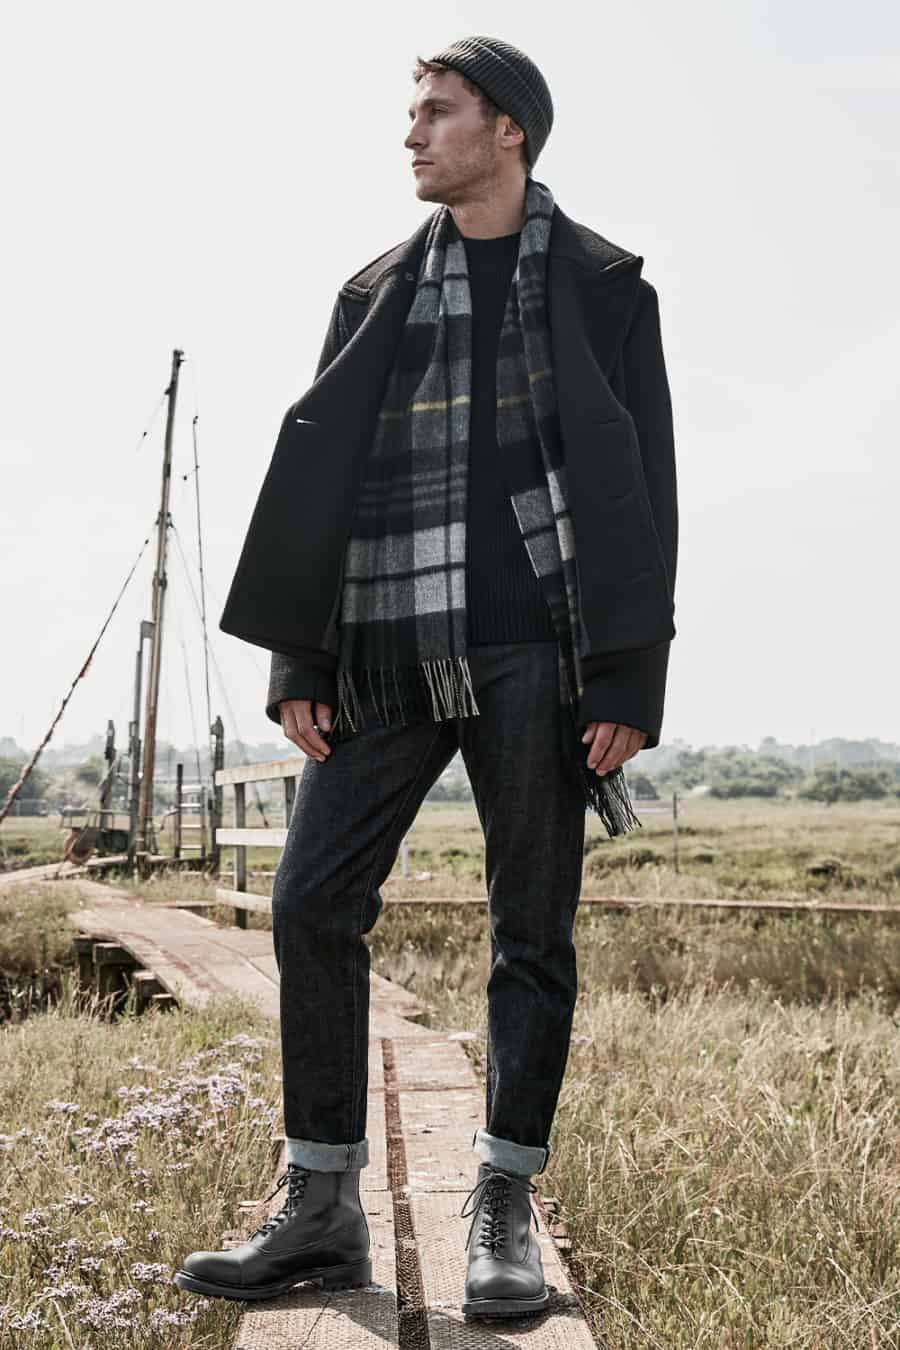 Men's selvedge jeans, black boots, ribbed sweater and black peacoat outfit